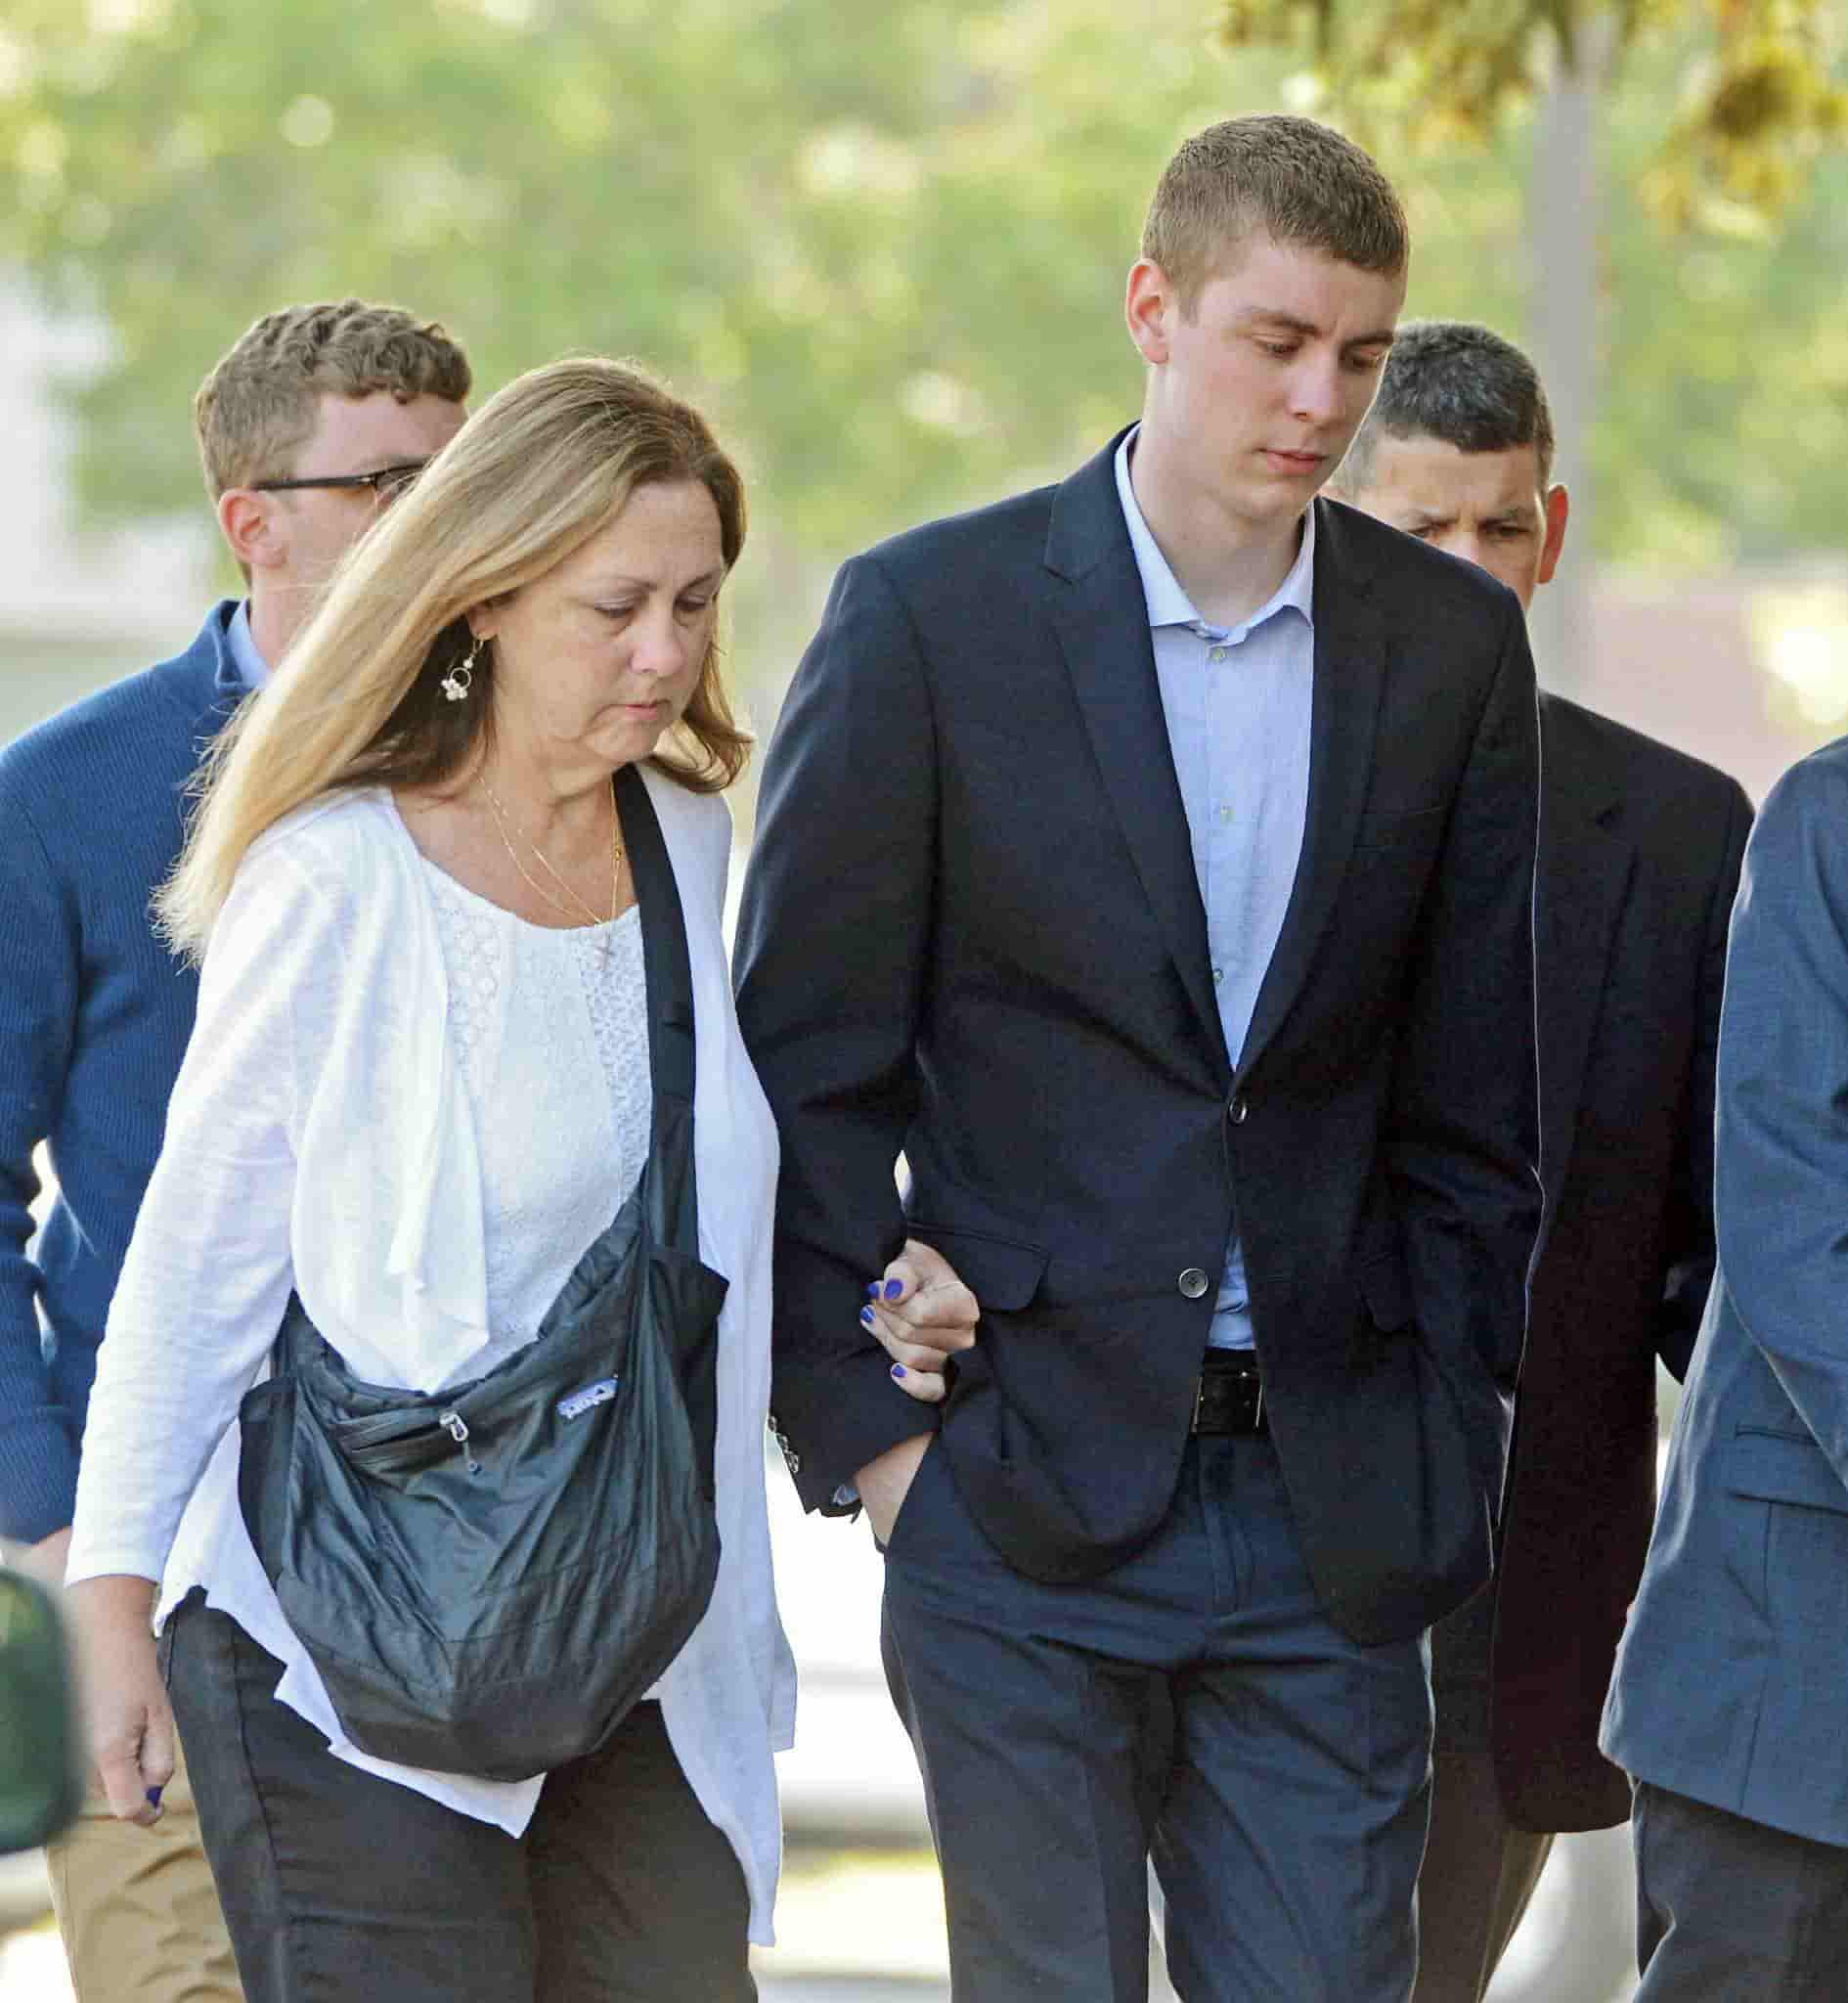 Image of Brock Turner with his mother, Carleen Turner